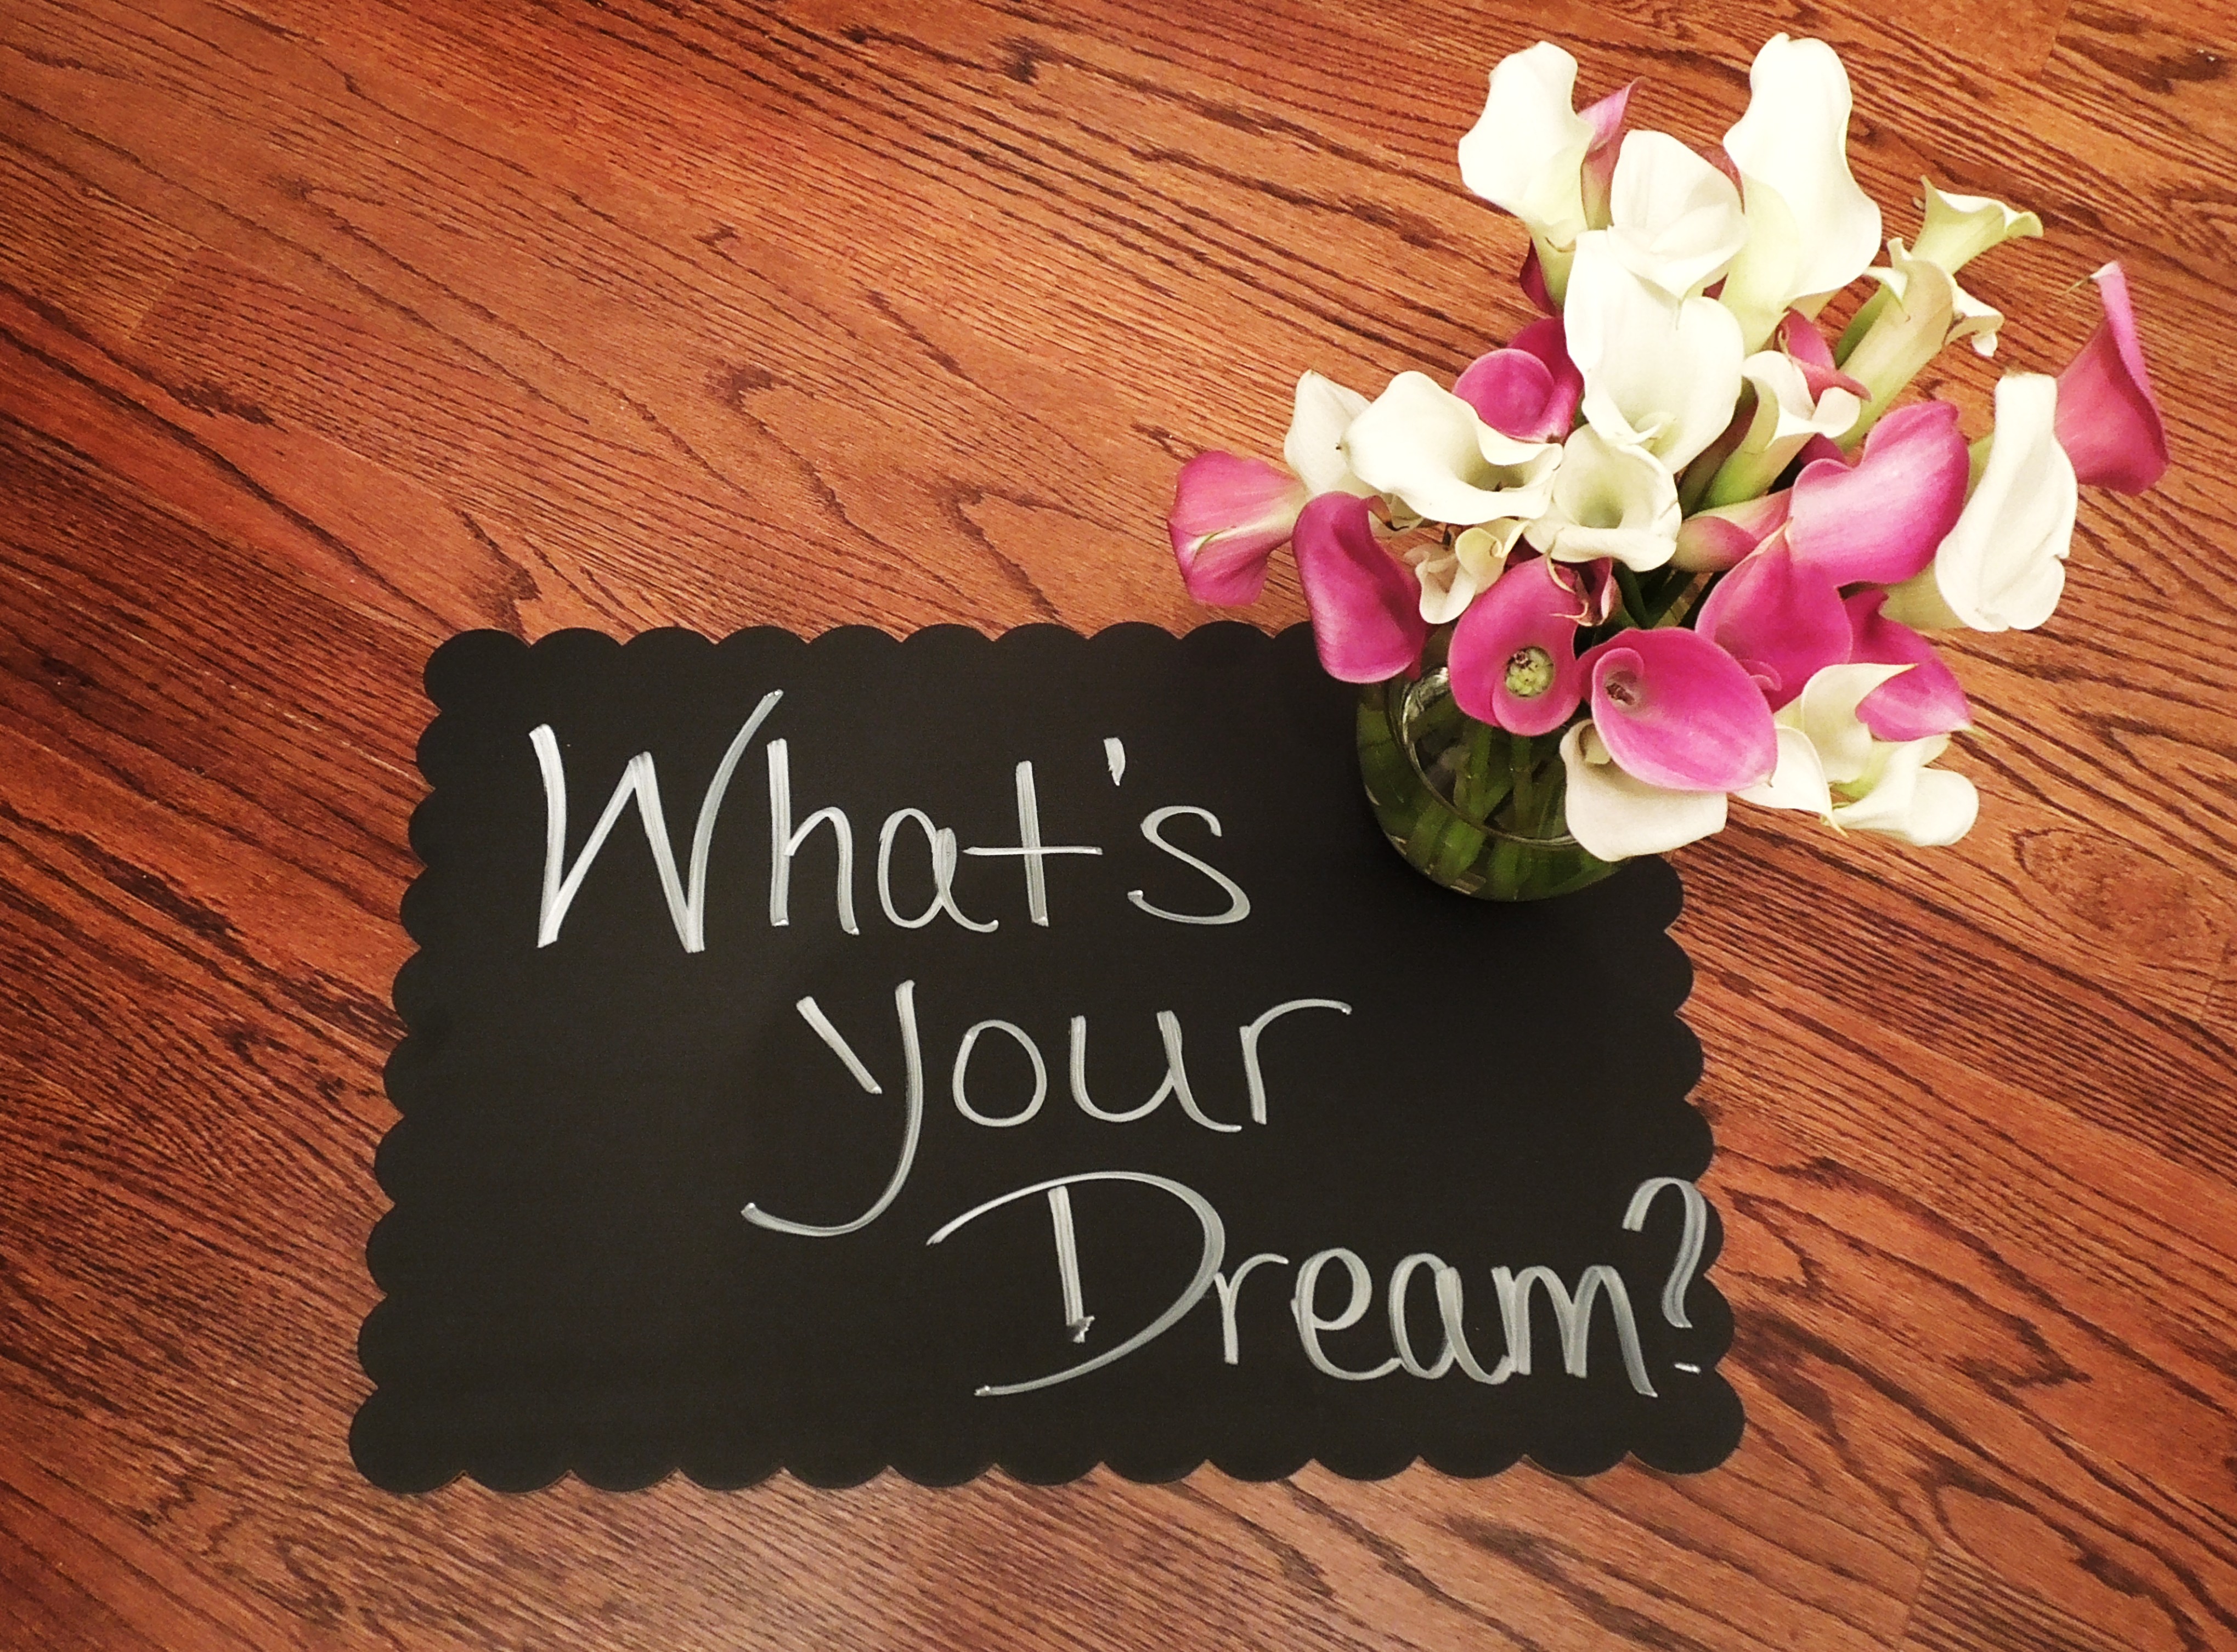 What’s Your Dream?